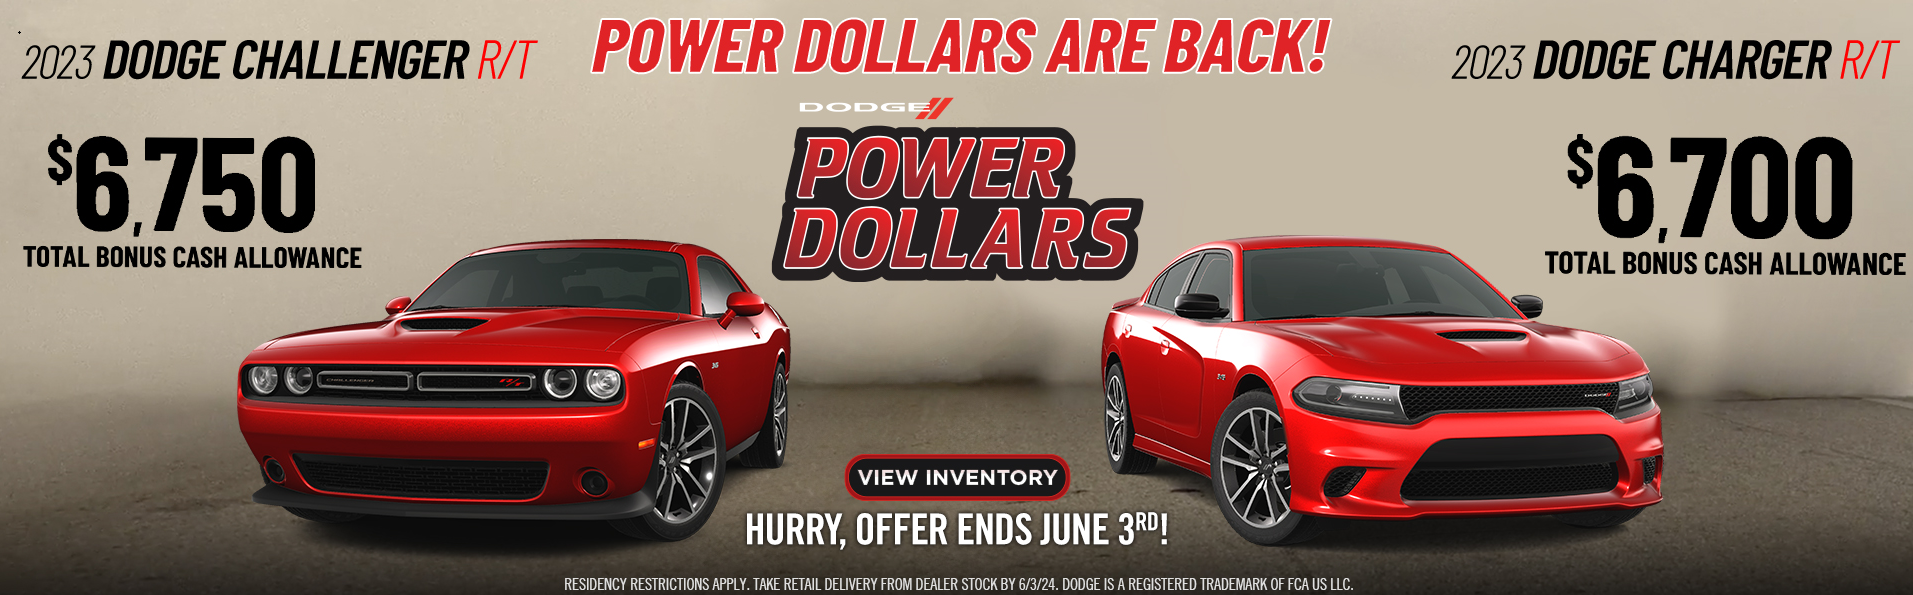 Dodge Challenger, Charger Power Dollars